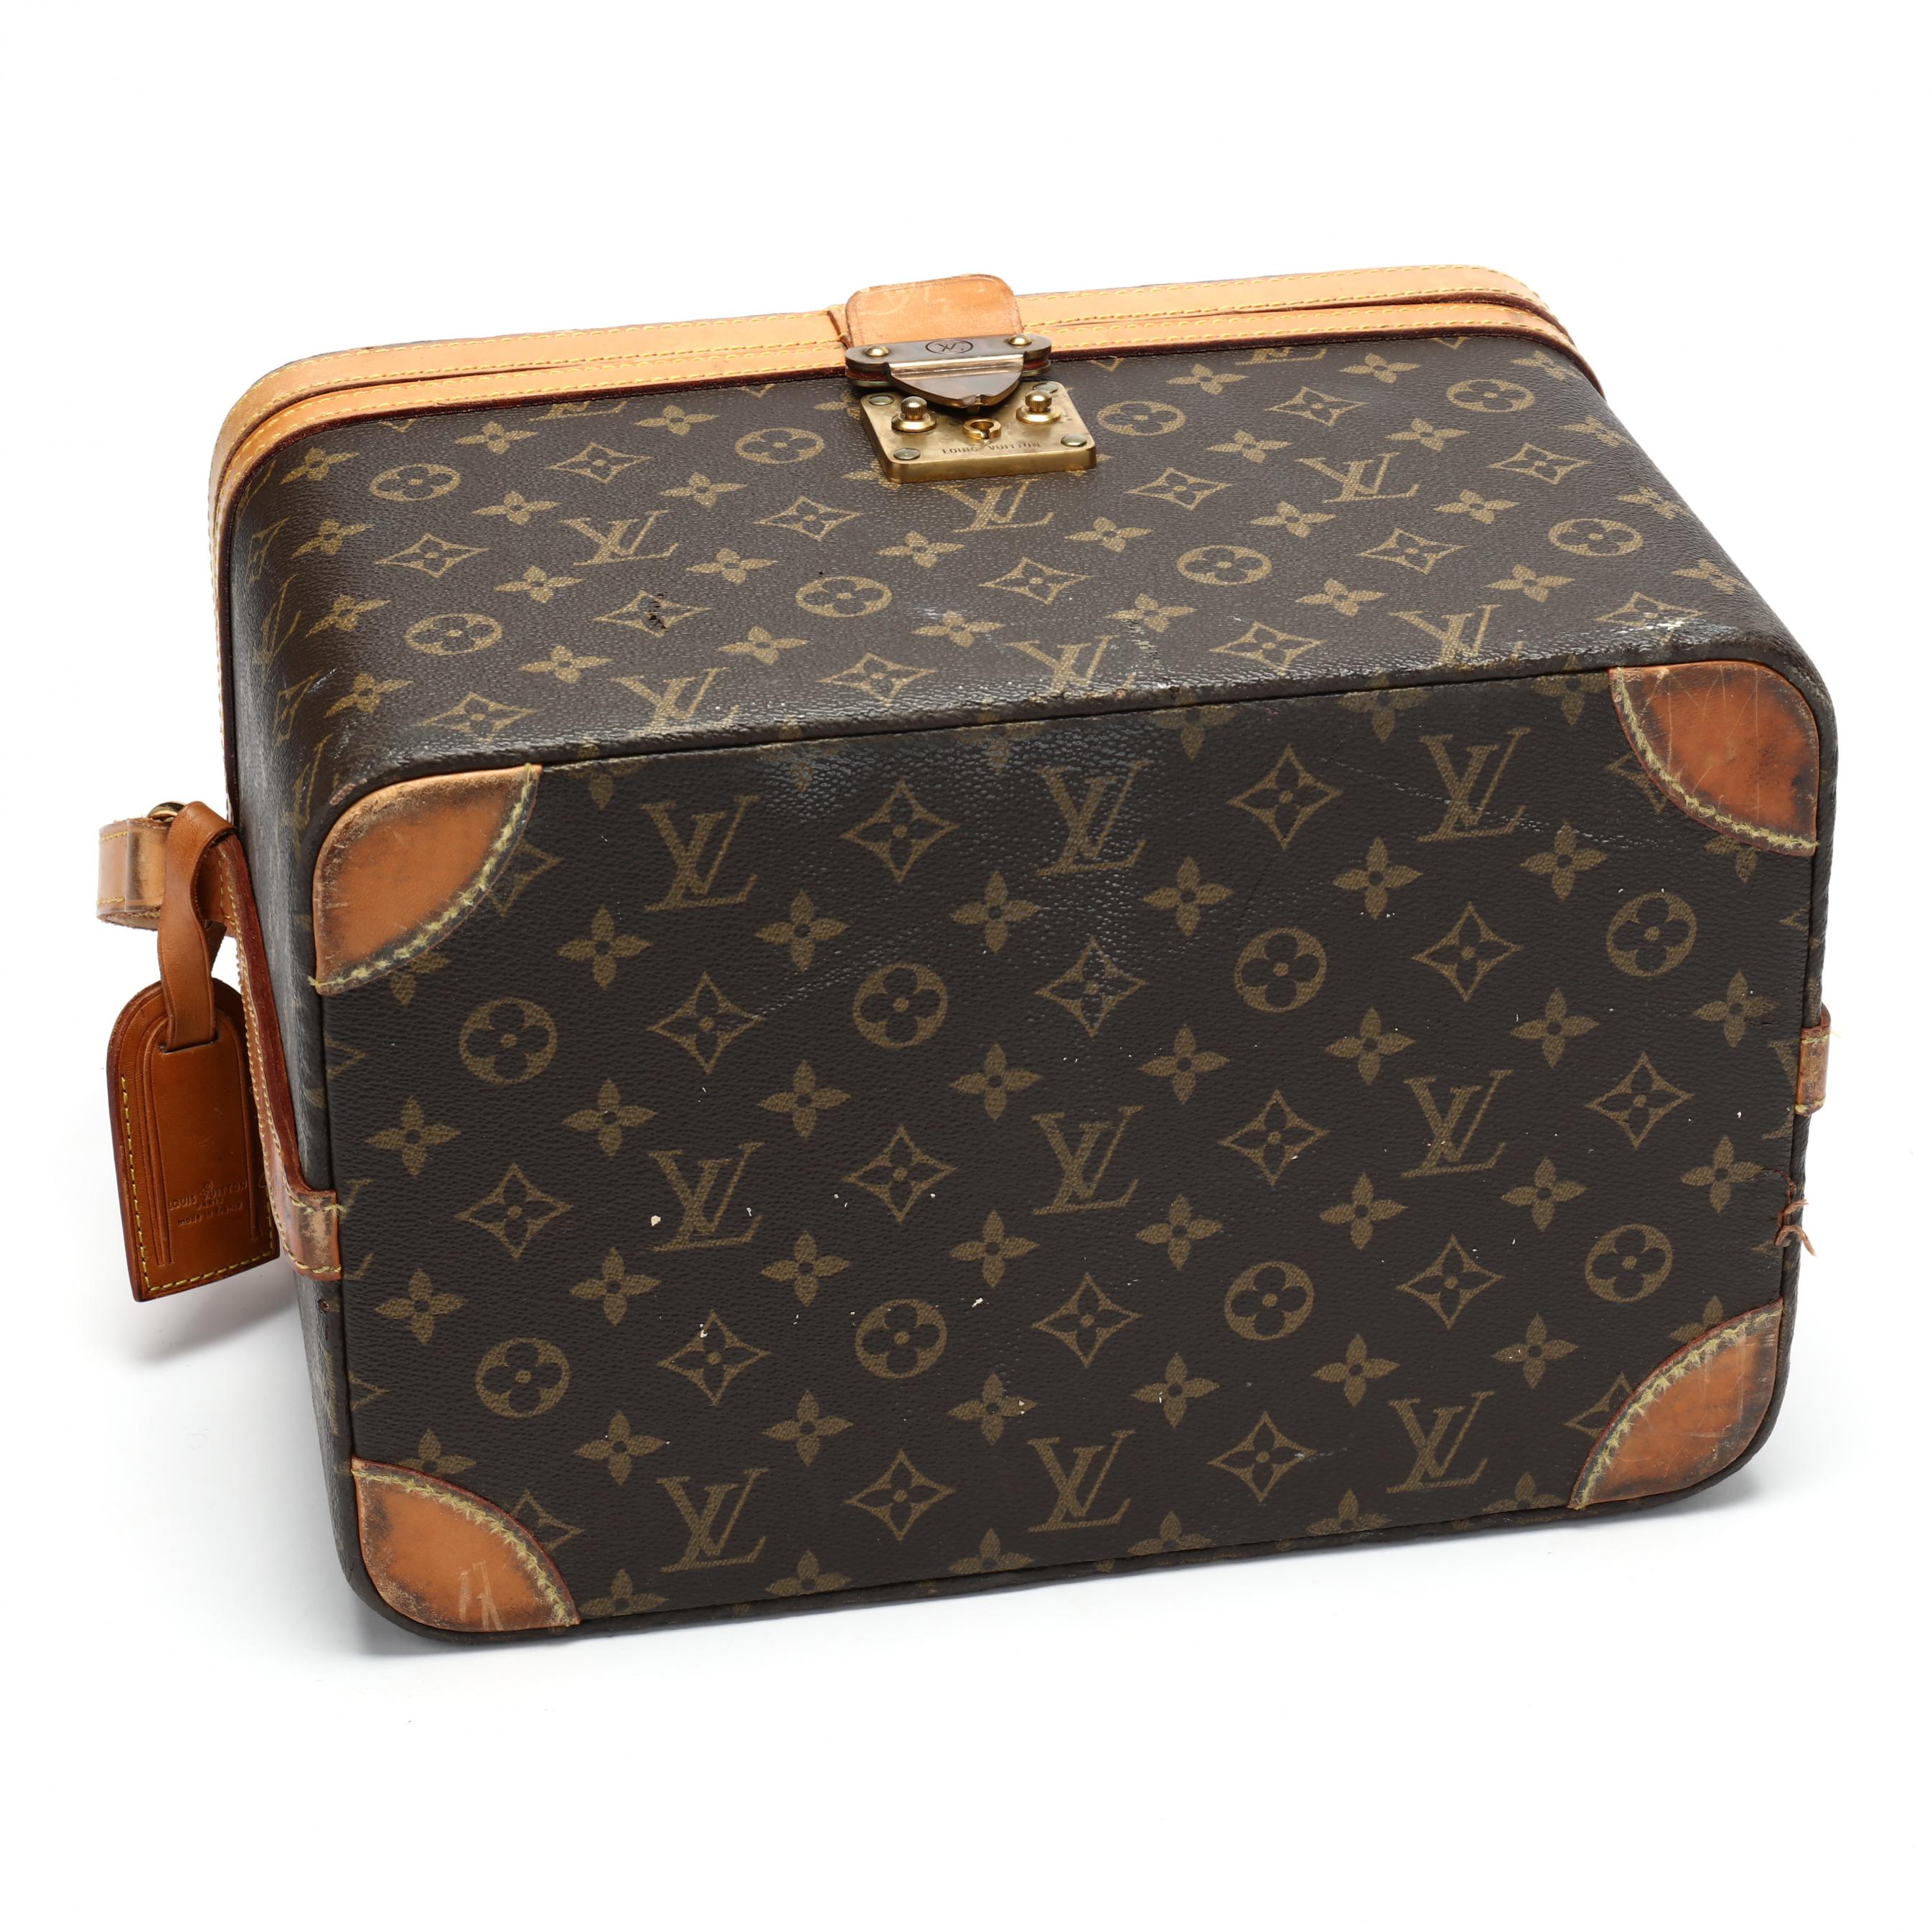 Louis Vuitton Train Case - 11 For Sale on 1stDibs  louis vuitton vintage train  case, louis vuitton train case vintage, louis vuitton makeup train case